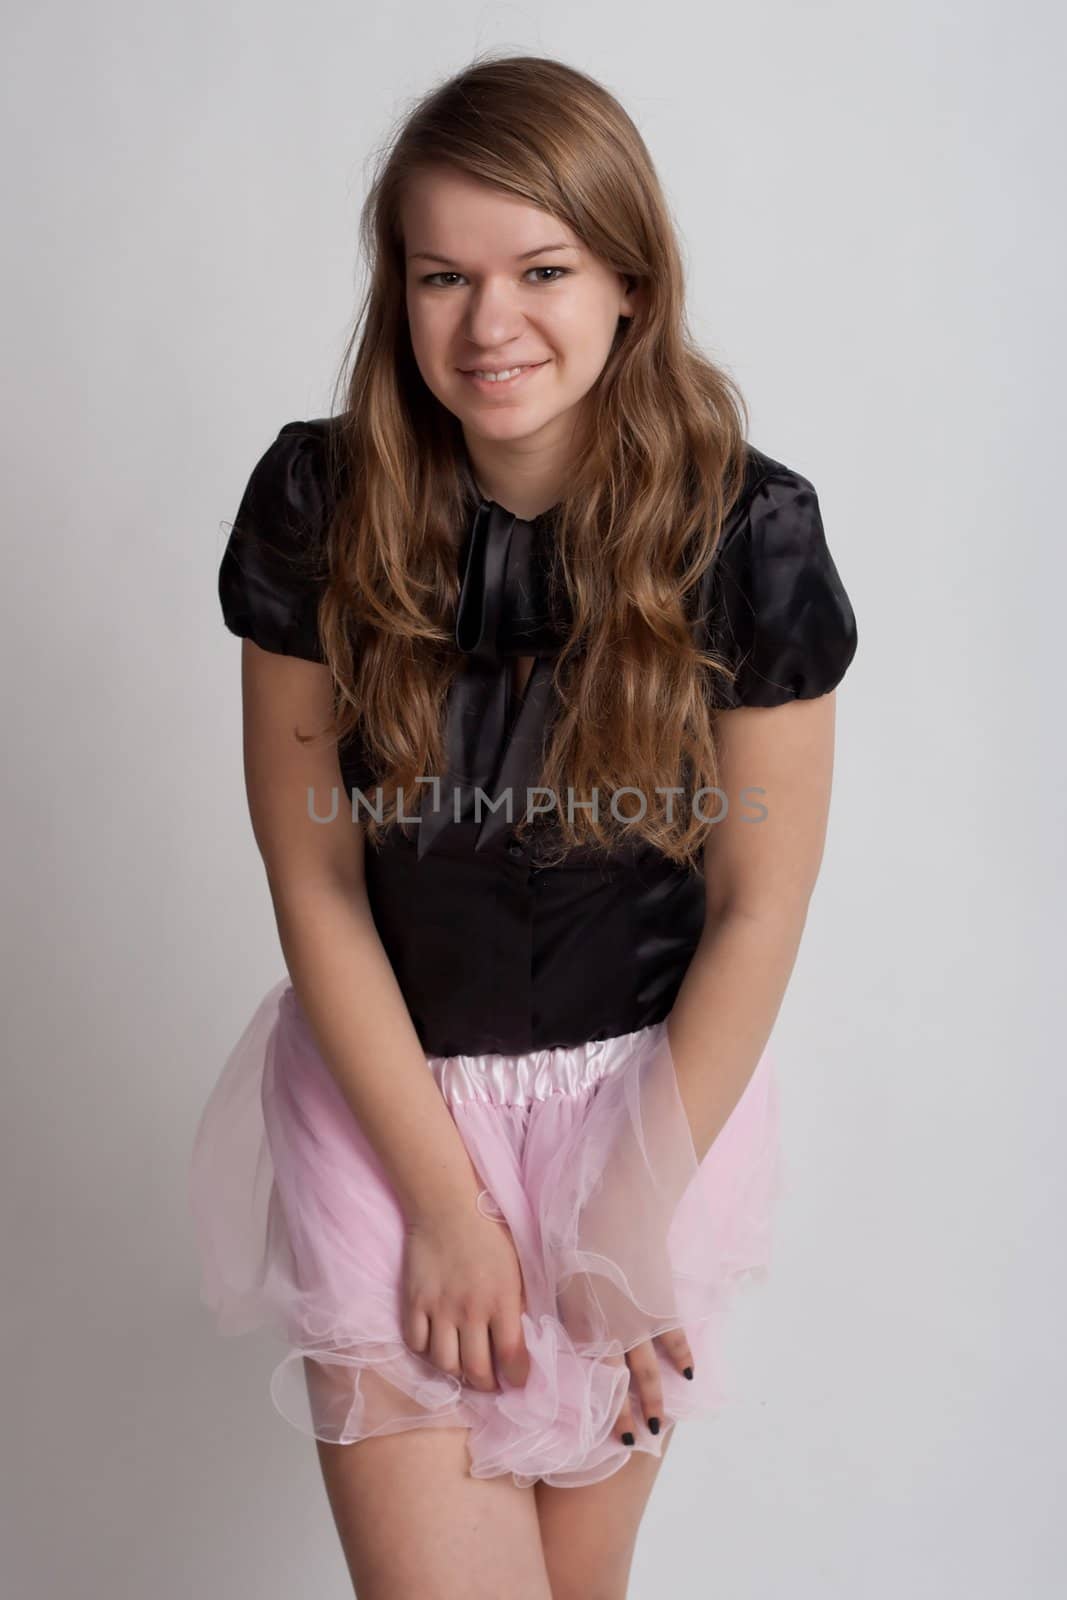 Young girl in a pink skirt by victosha